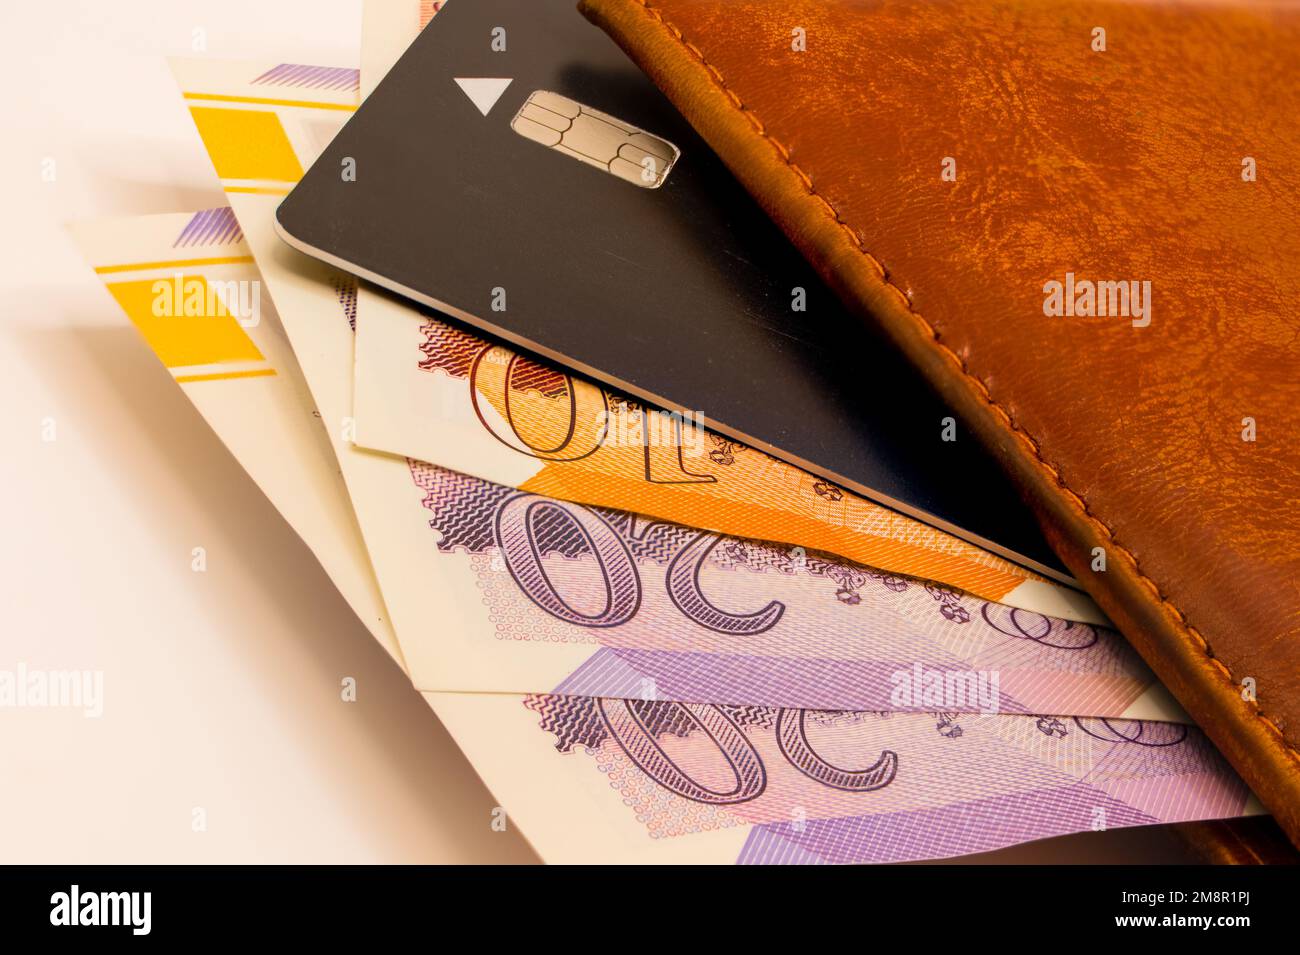 close-up of a pile of ten and twenty pound sterling notes with a brown leather wallet and black bank card Stock Photo